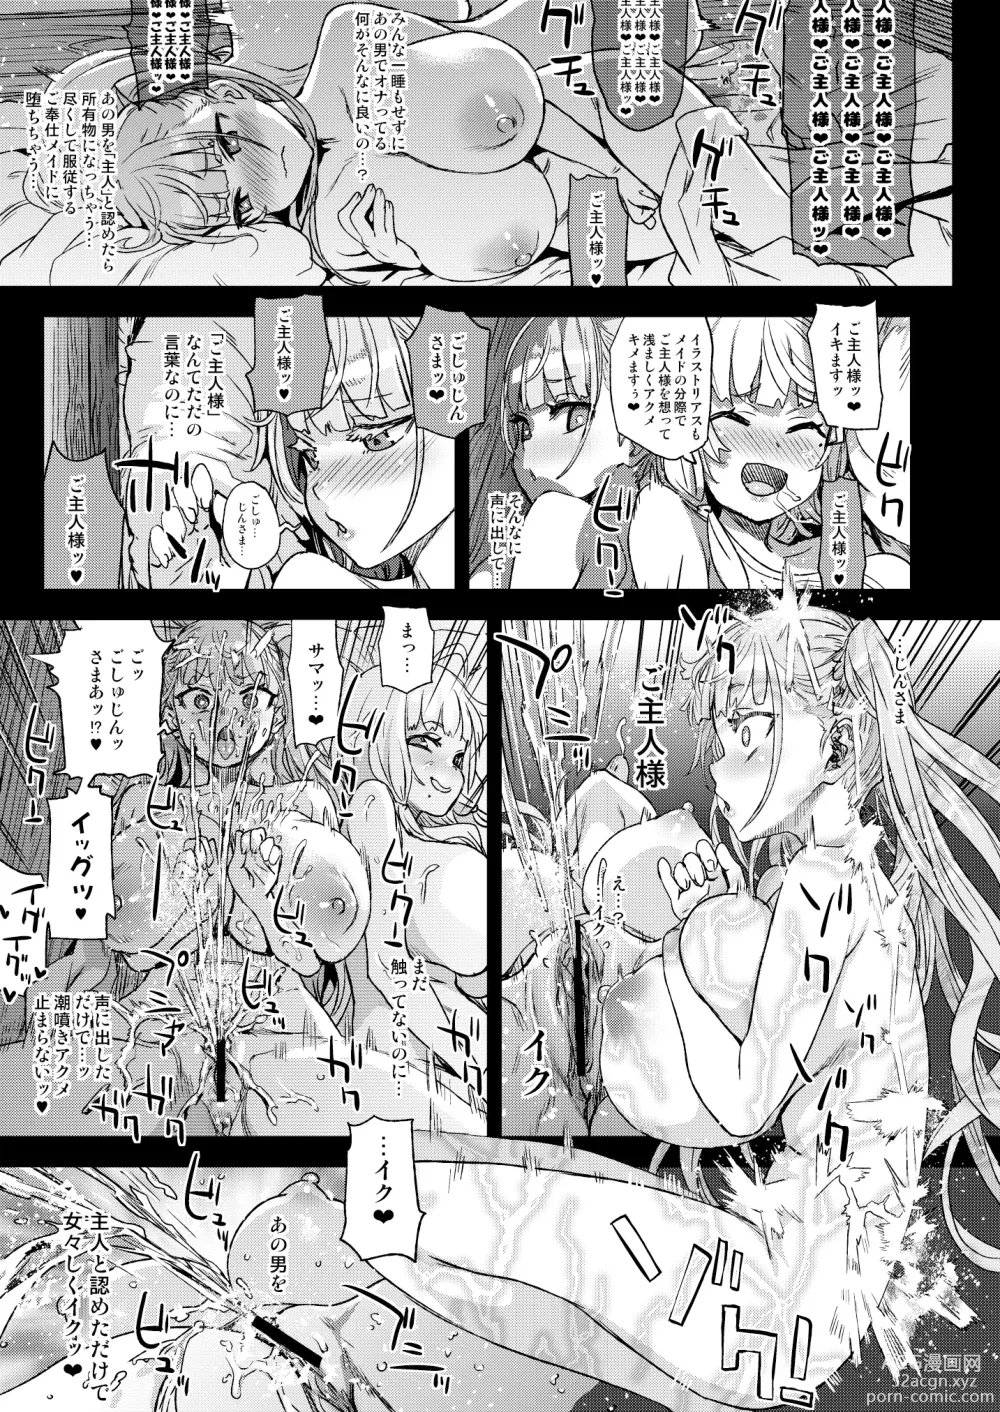 Page 15 of doujinshi Lady falls into a maid